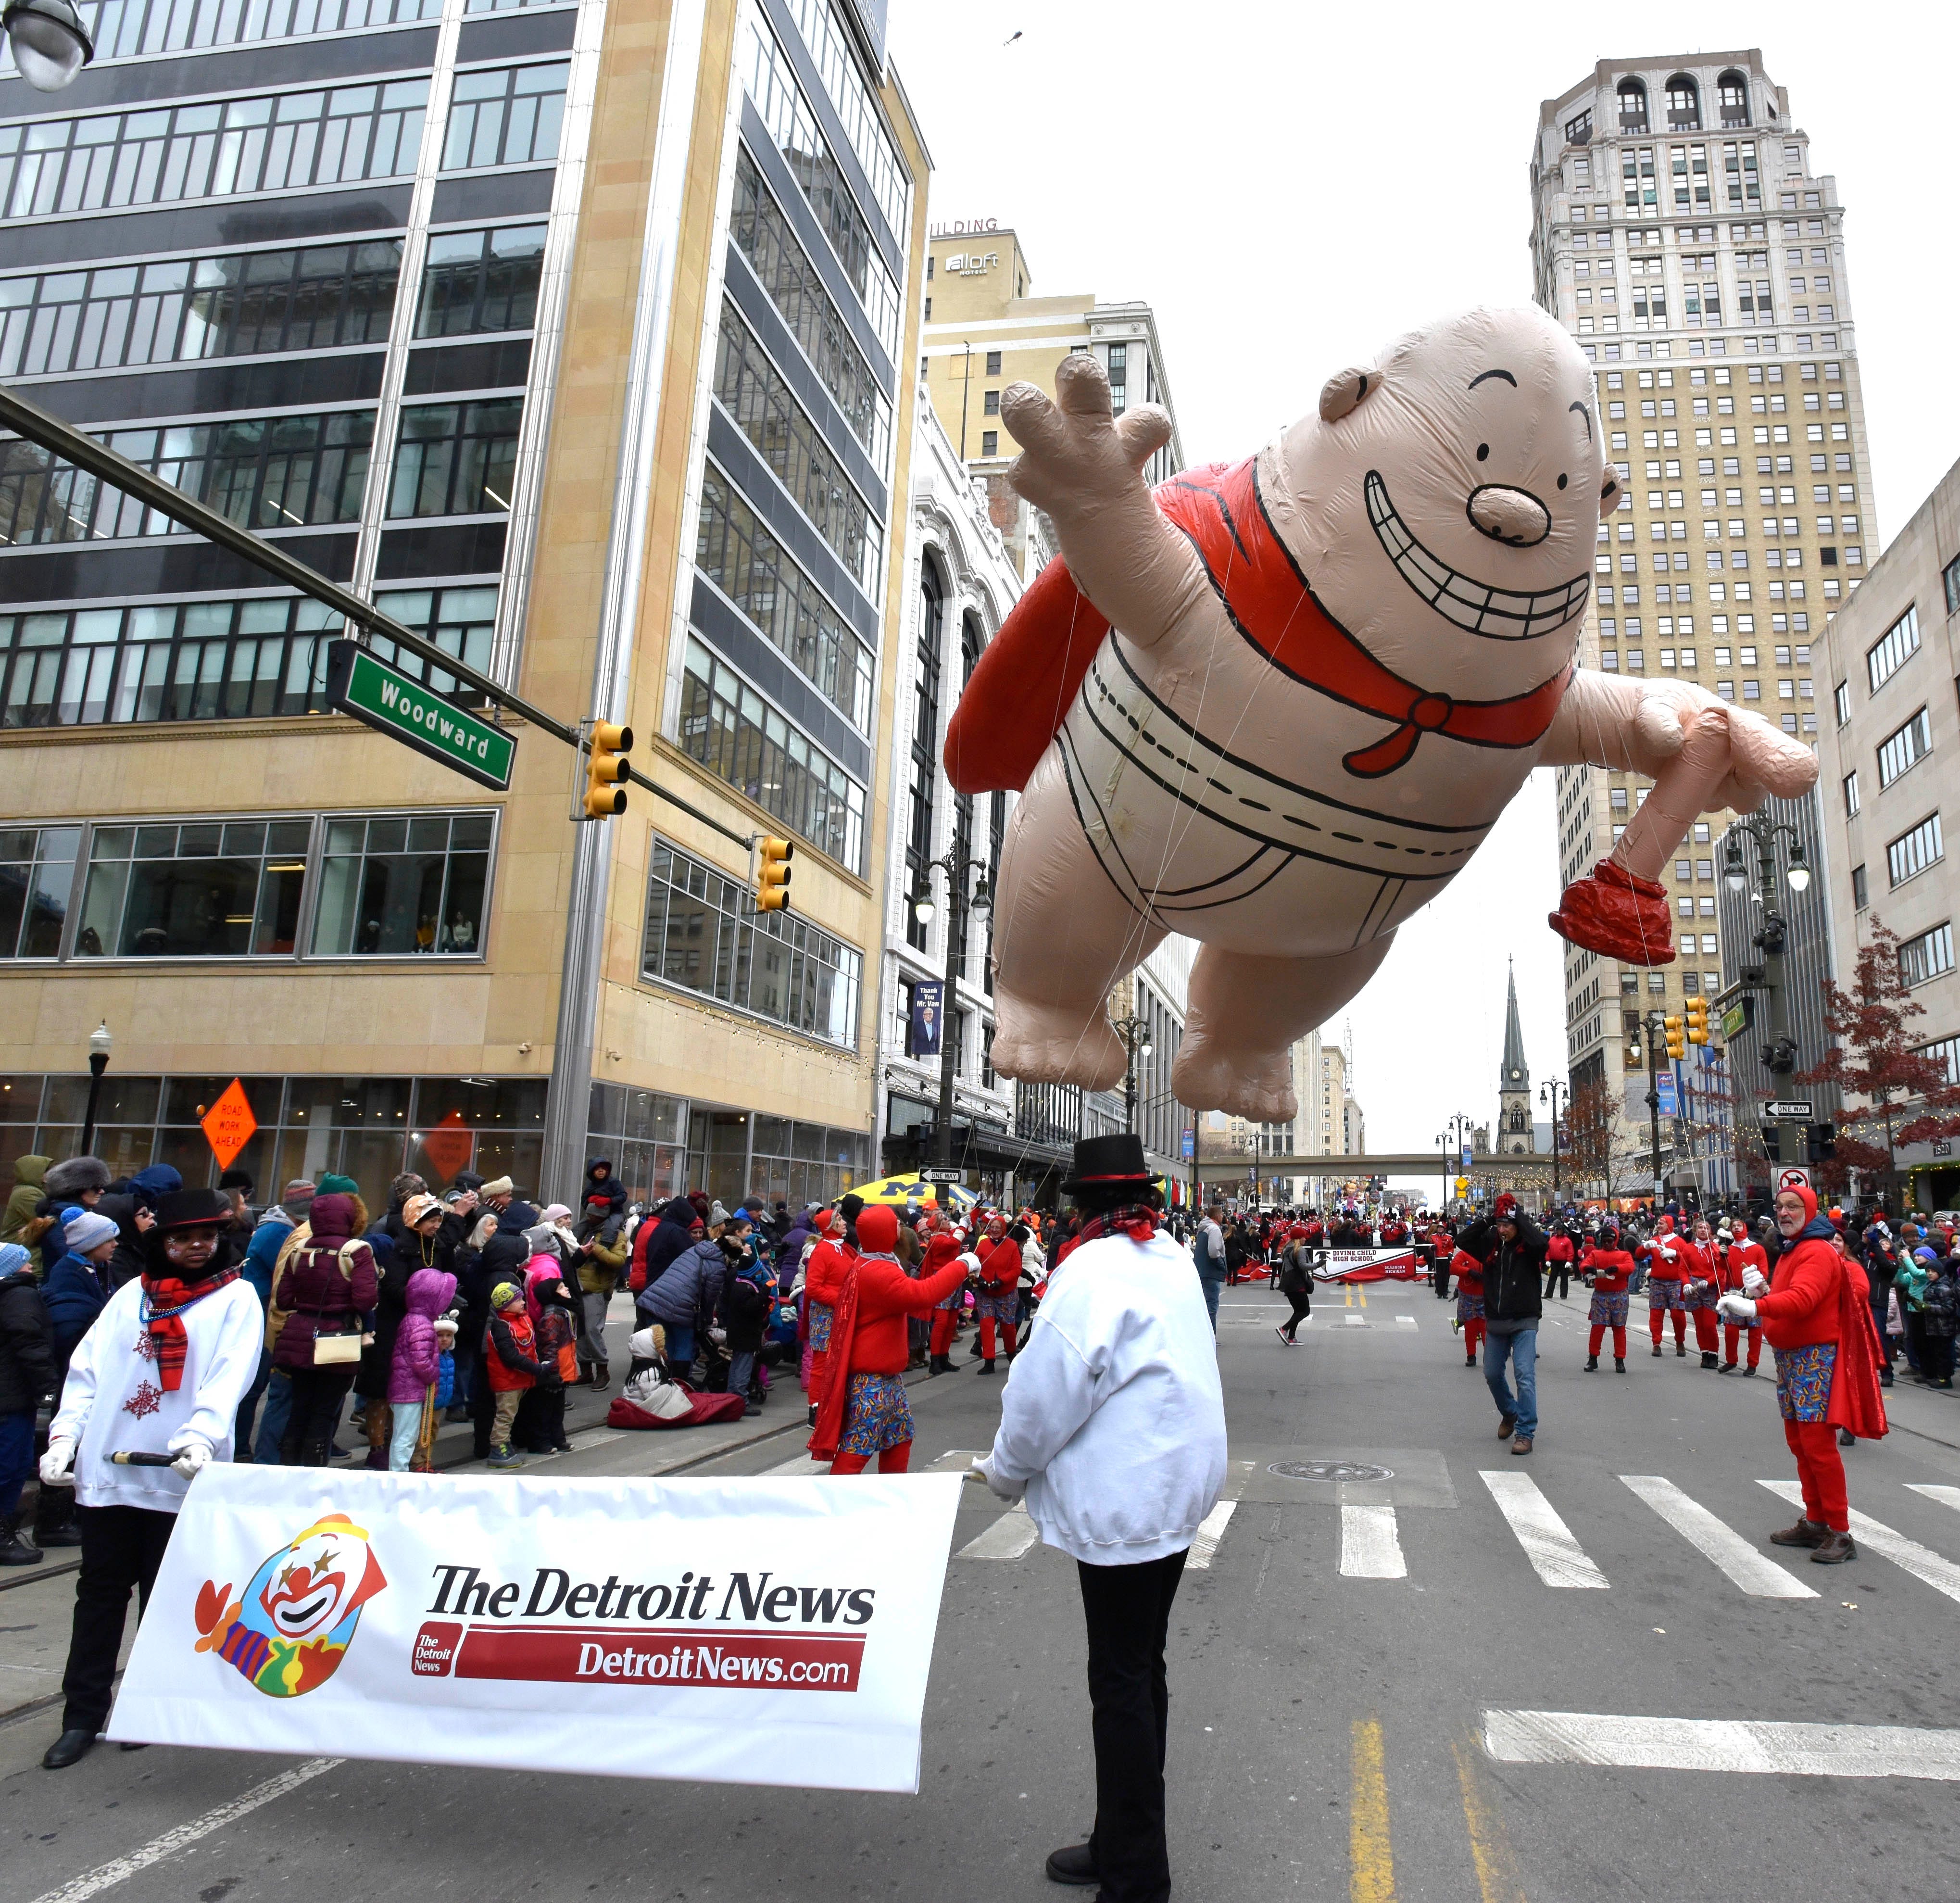 The Captain Underpants balloon is sponsored by The Detroit News.